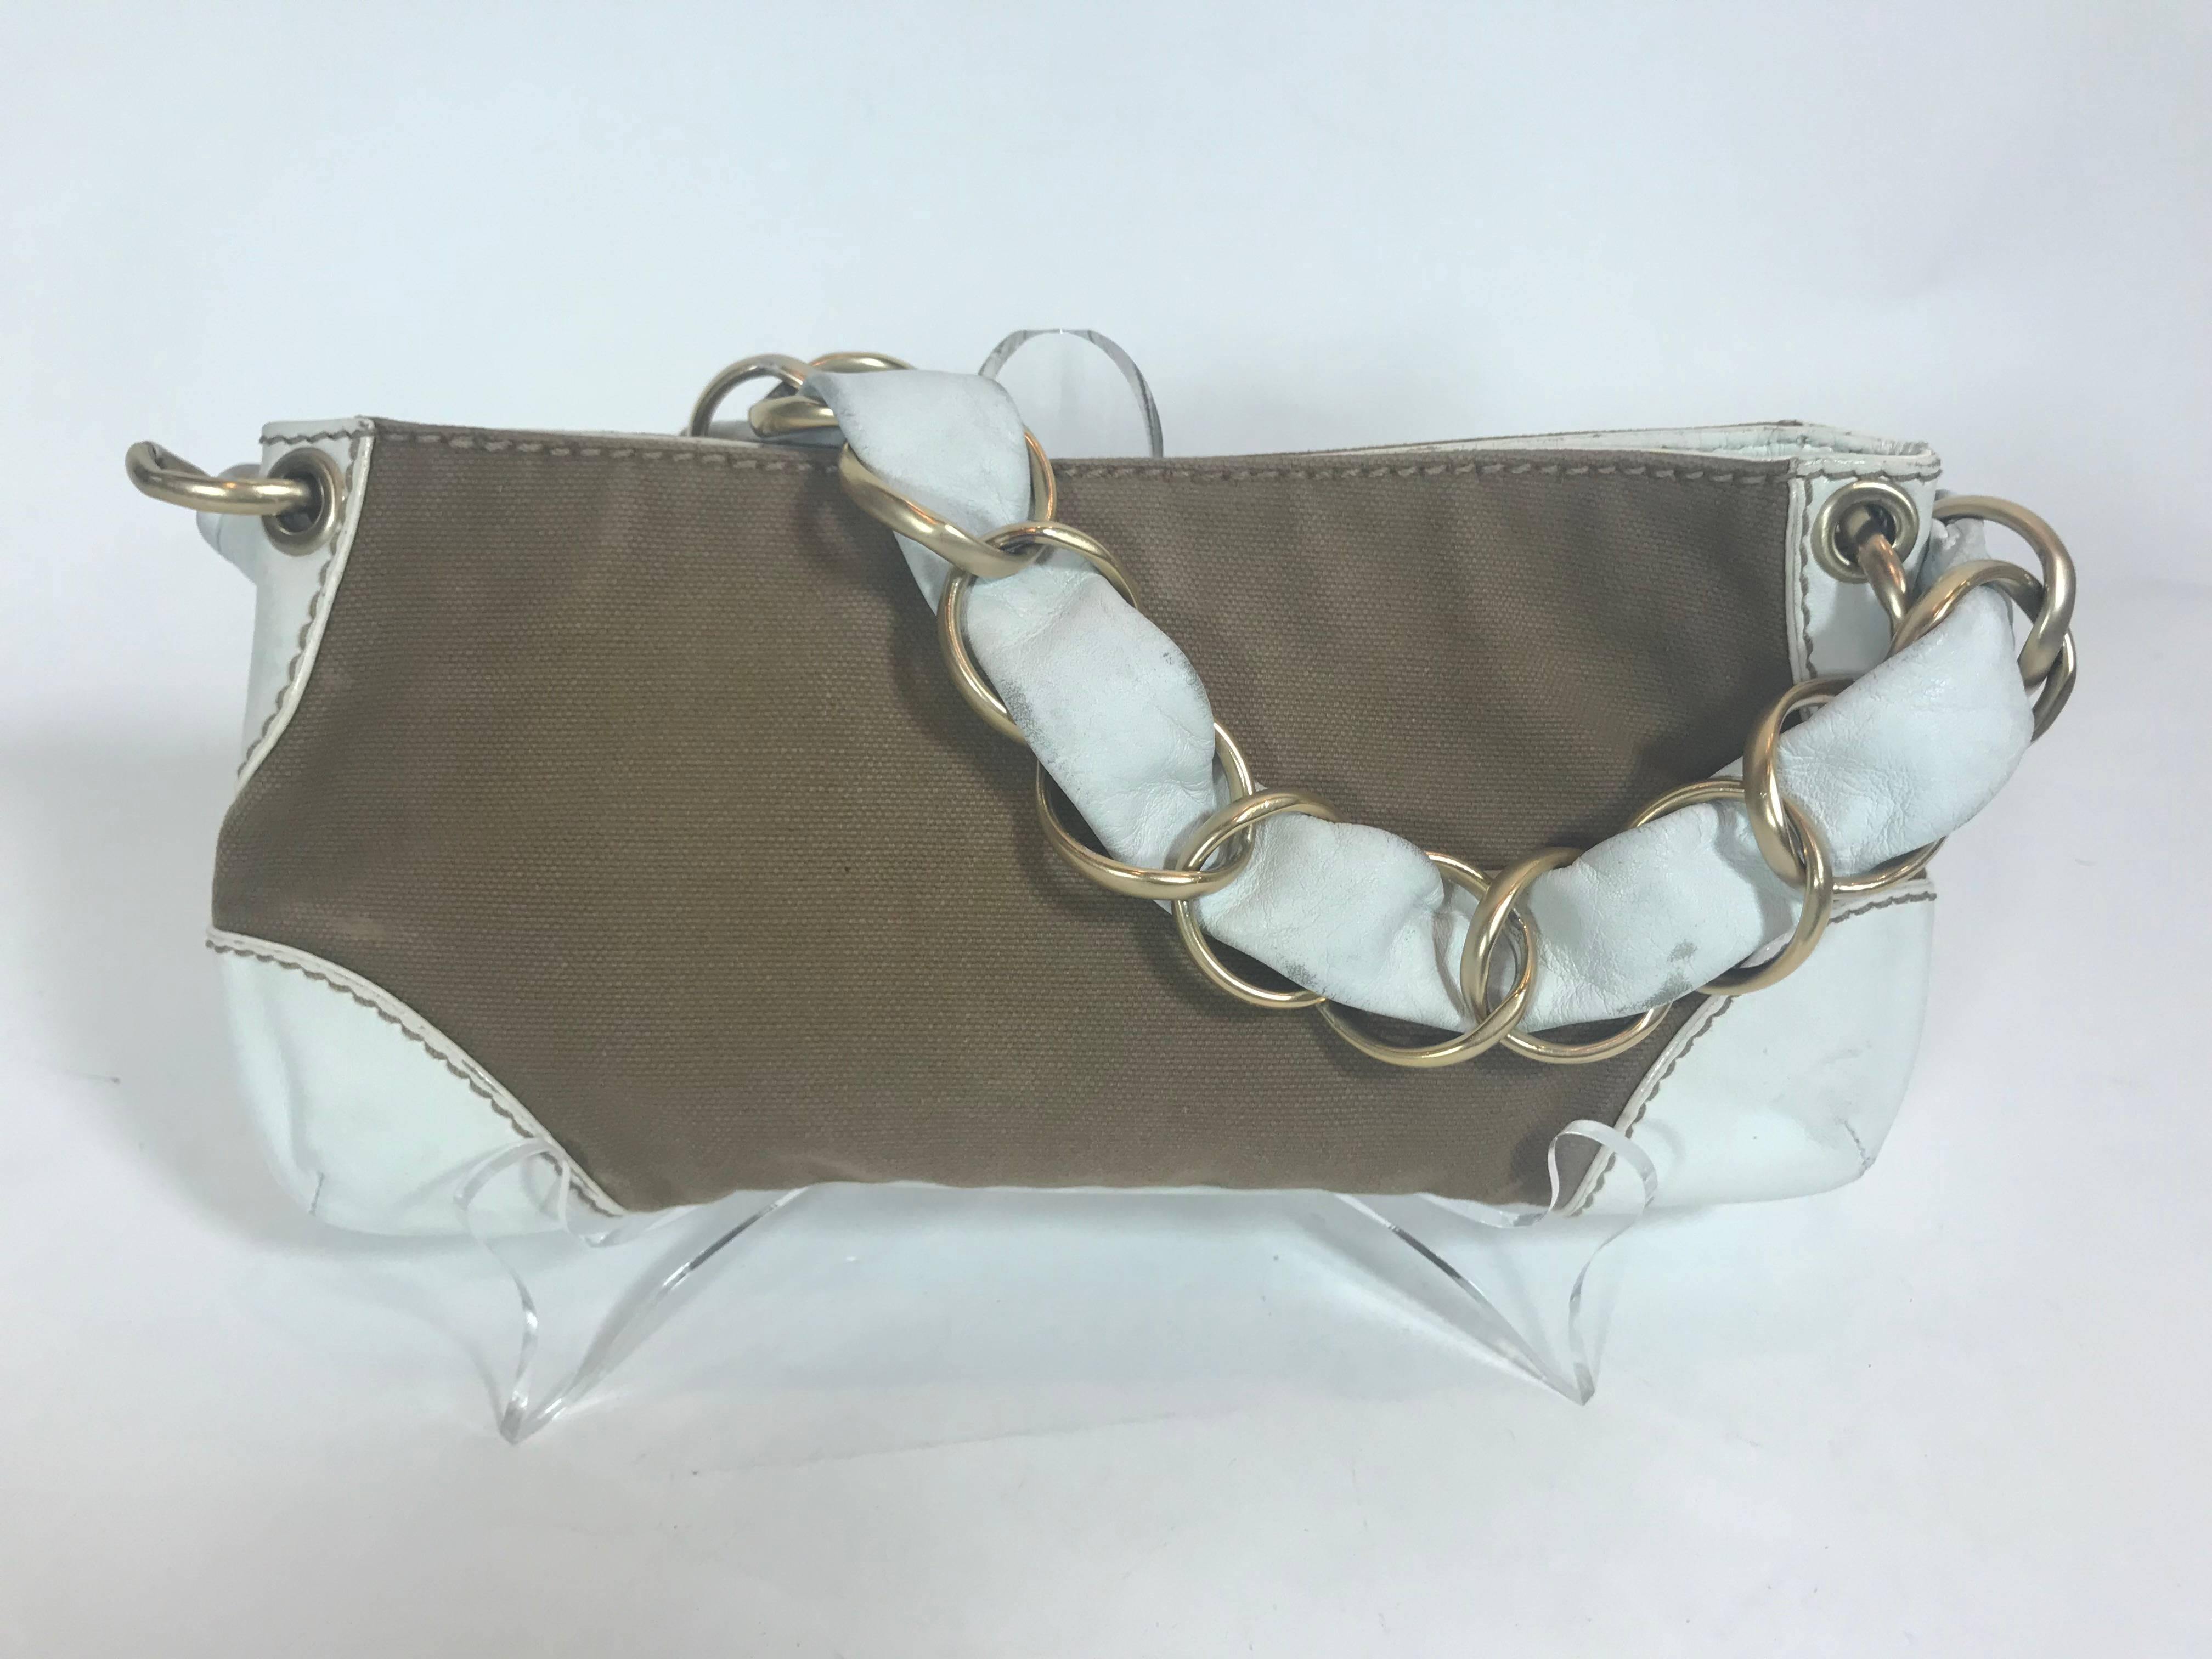 Leather and cotton hand bag
Magnetic closure on top with white leather at edges and strap.
Beige cotton lining interior with 1 side pockets closed with zipper.
Retail: $1,250